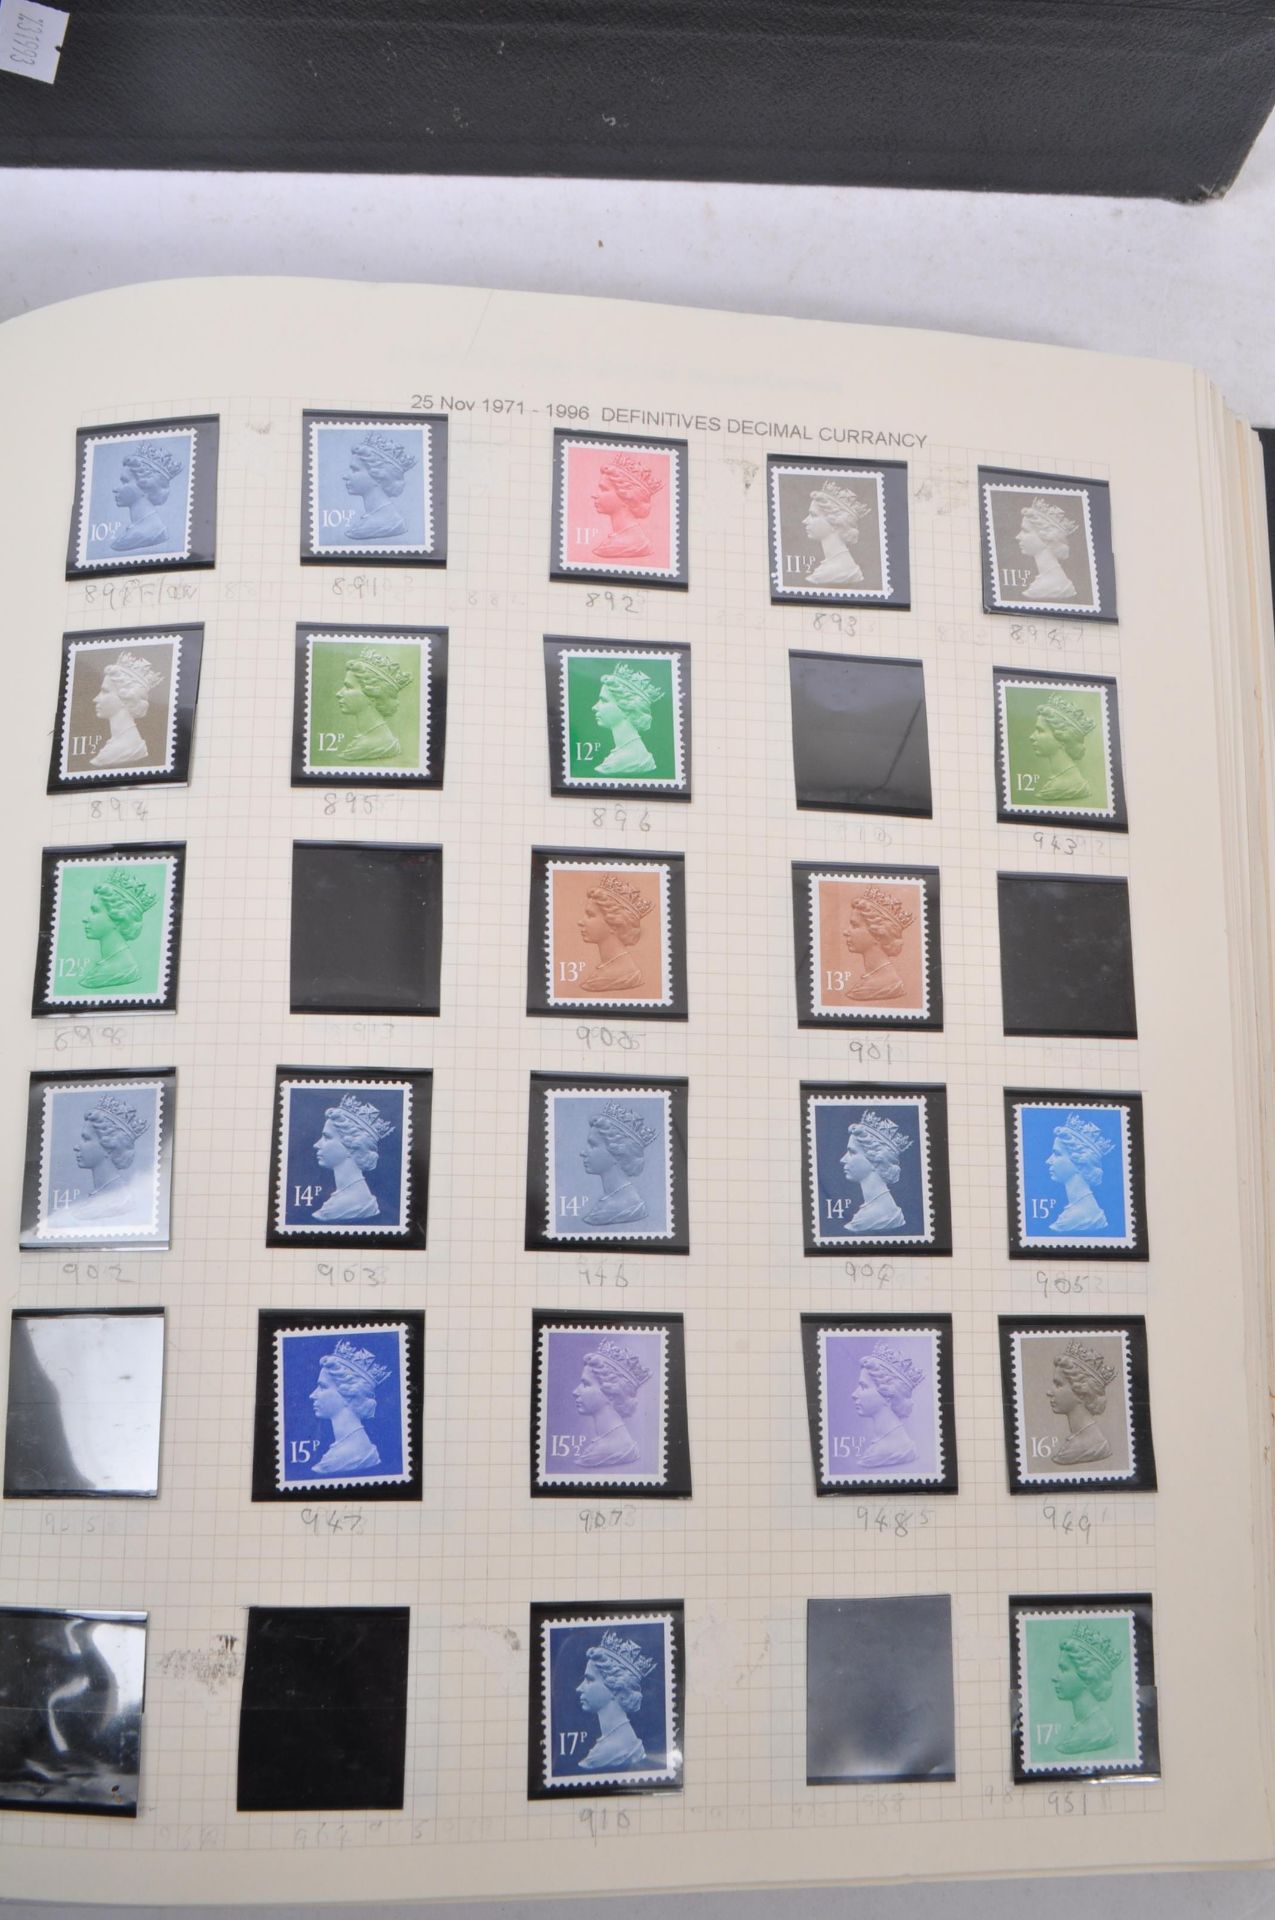 COLLECTION OF UK COMMEMORATIVE STAMPS IN TWO ALBUMS - Image 7 of 7